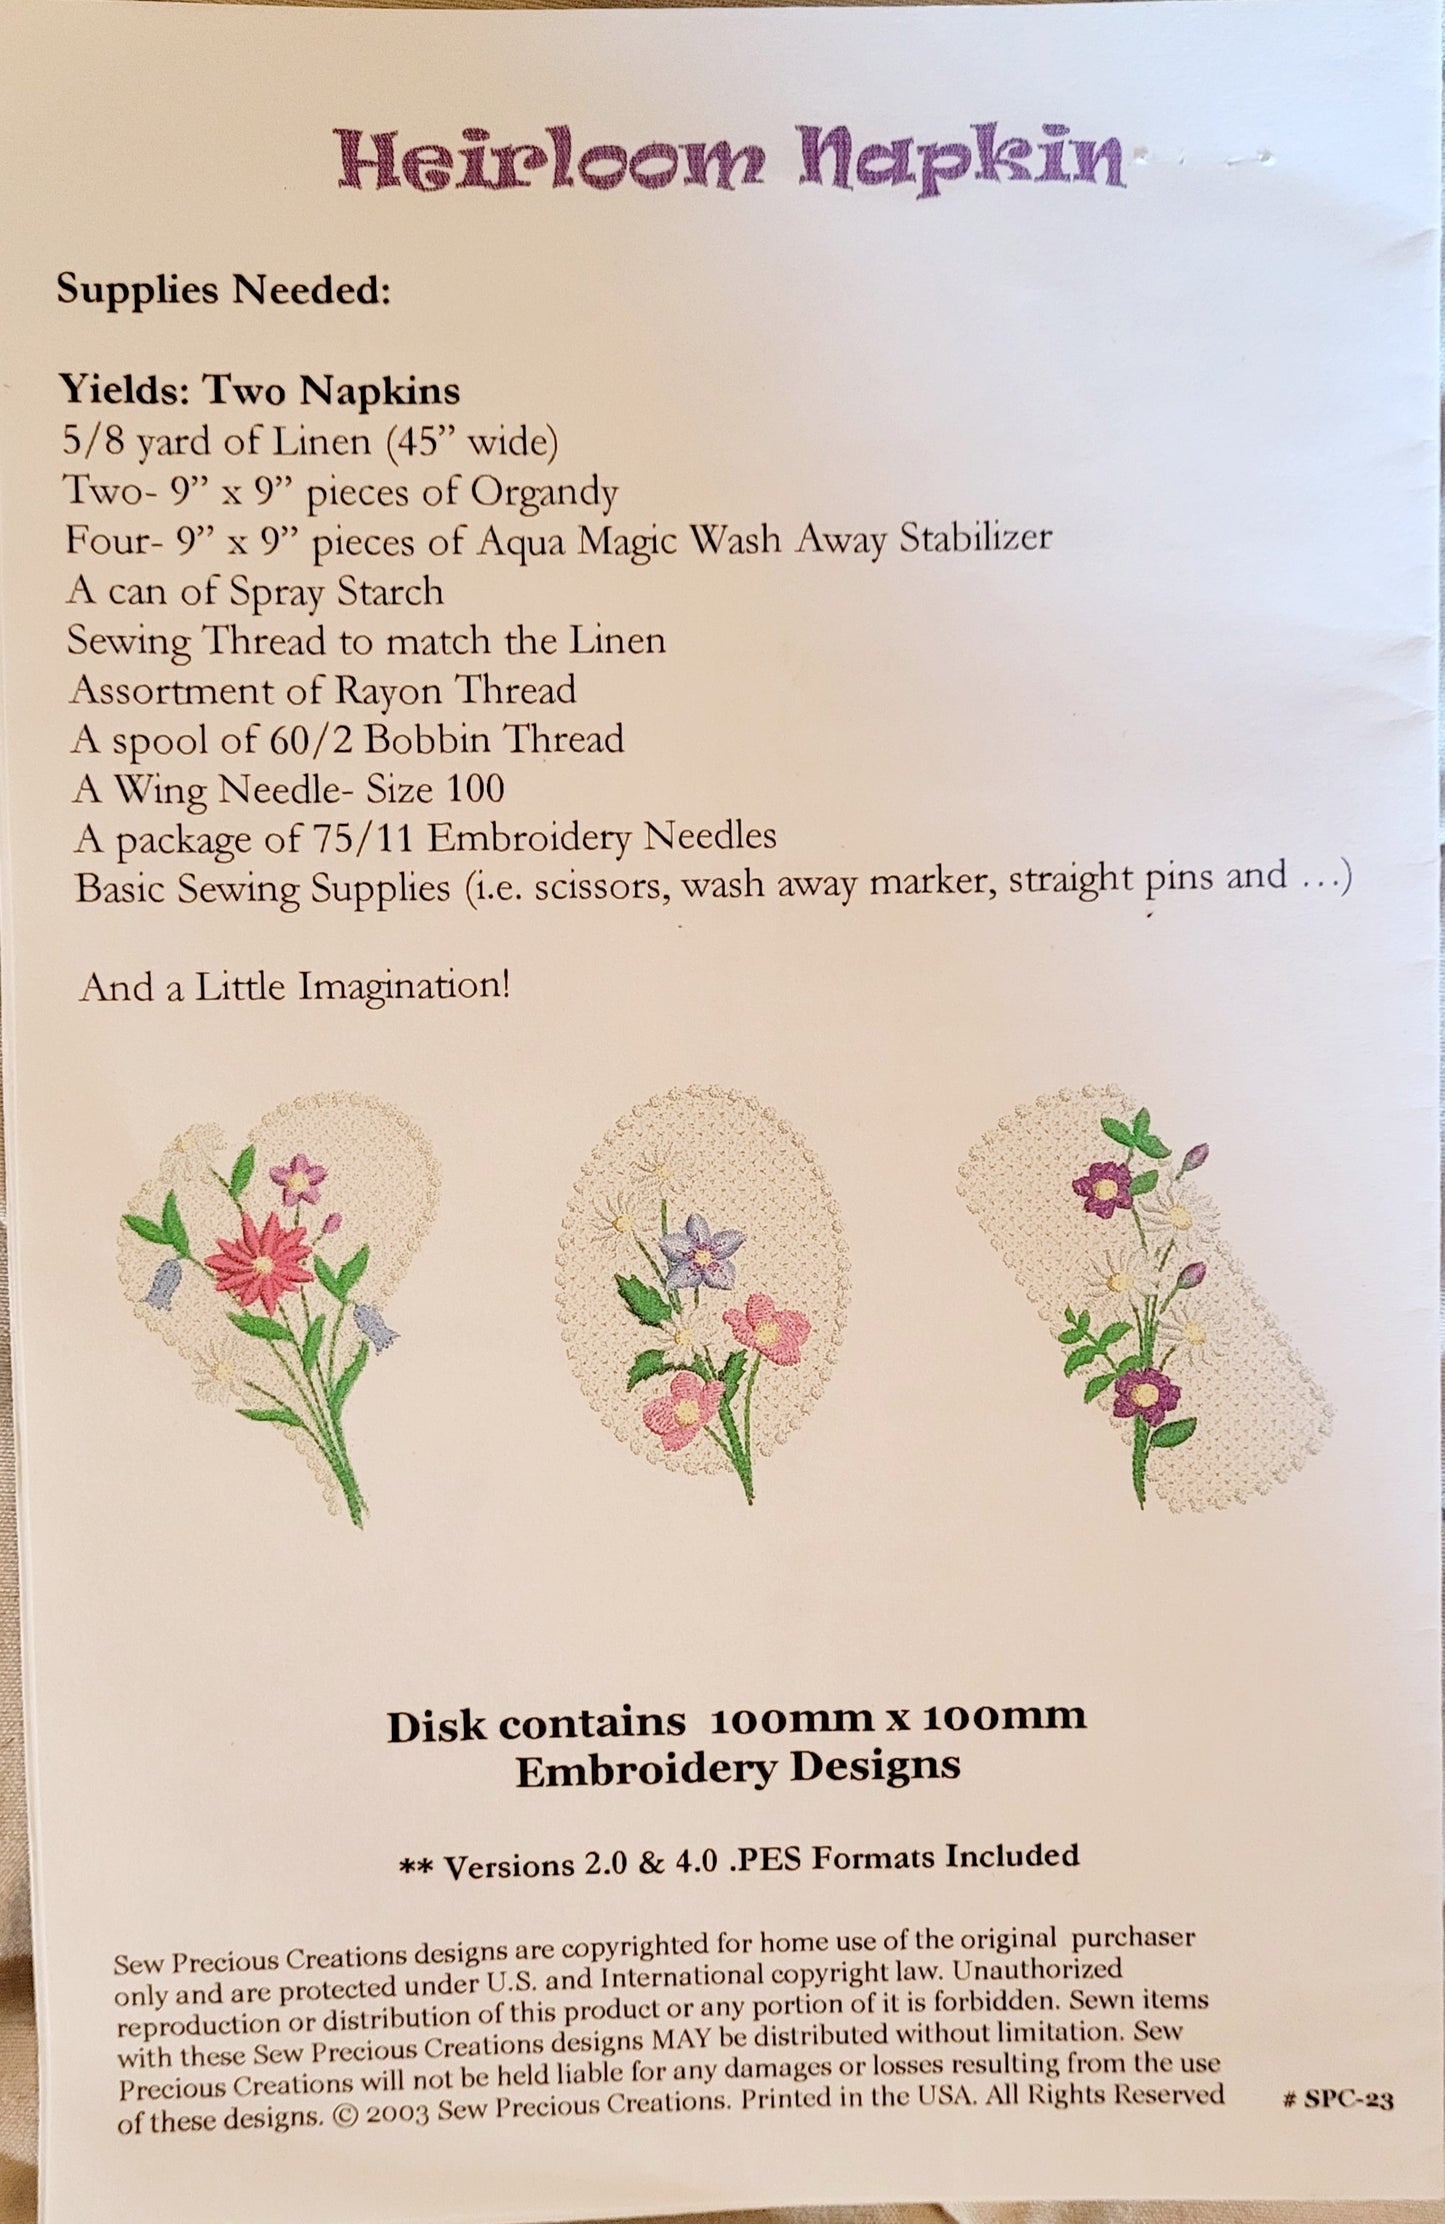 Heirloom Napkin *Several Embroidery Designs on (Disk Included)